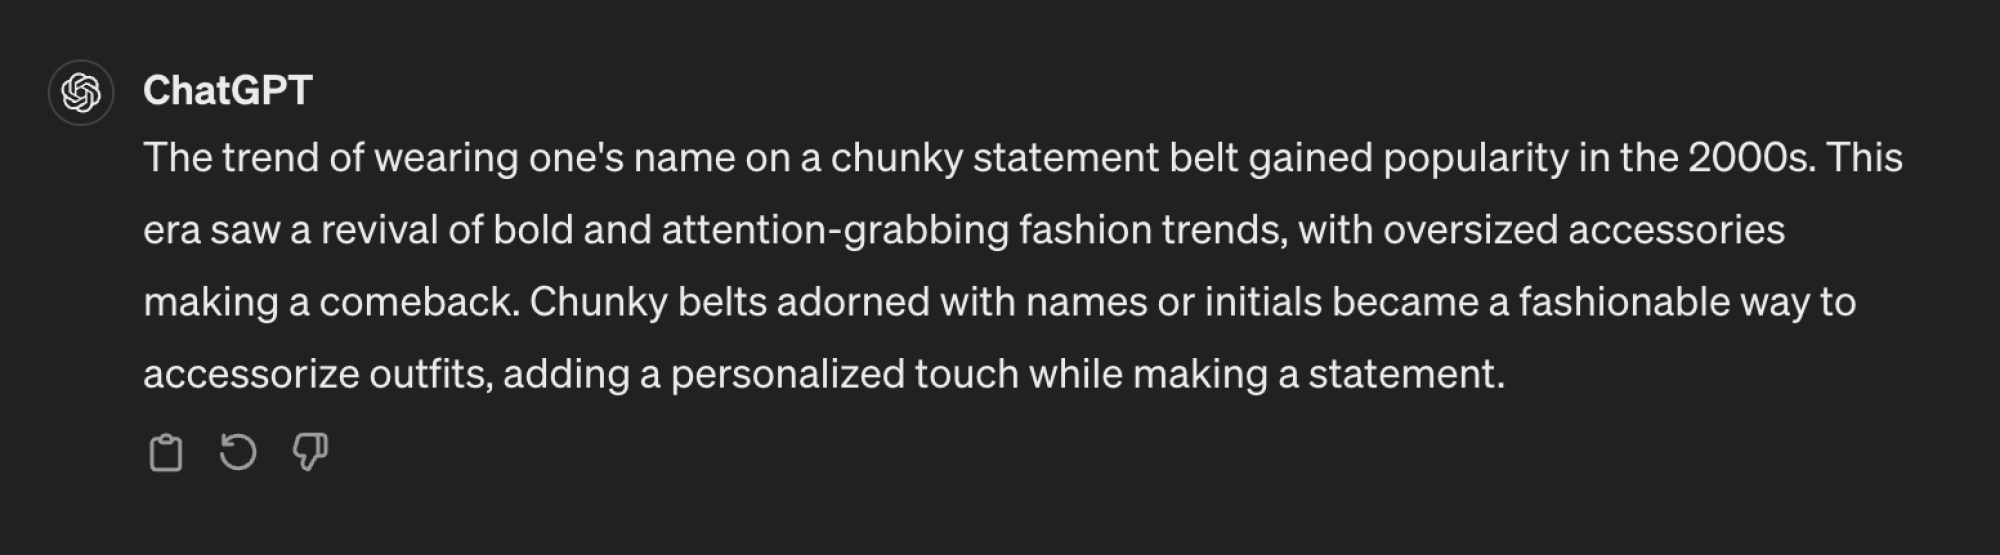 ChatGPT's response to a fashion history prompt